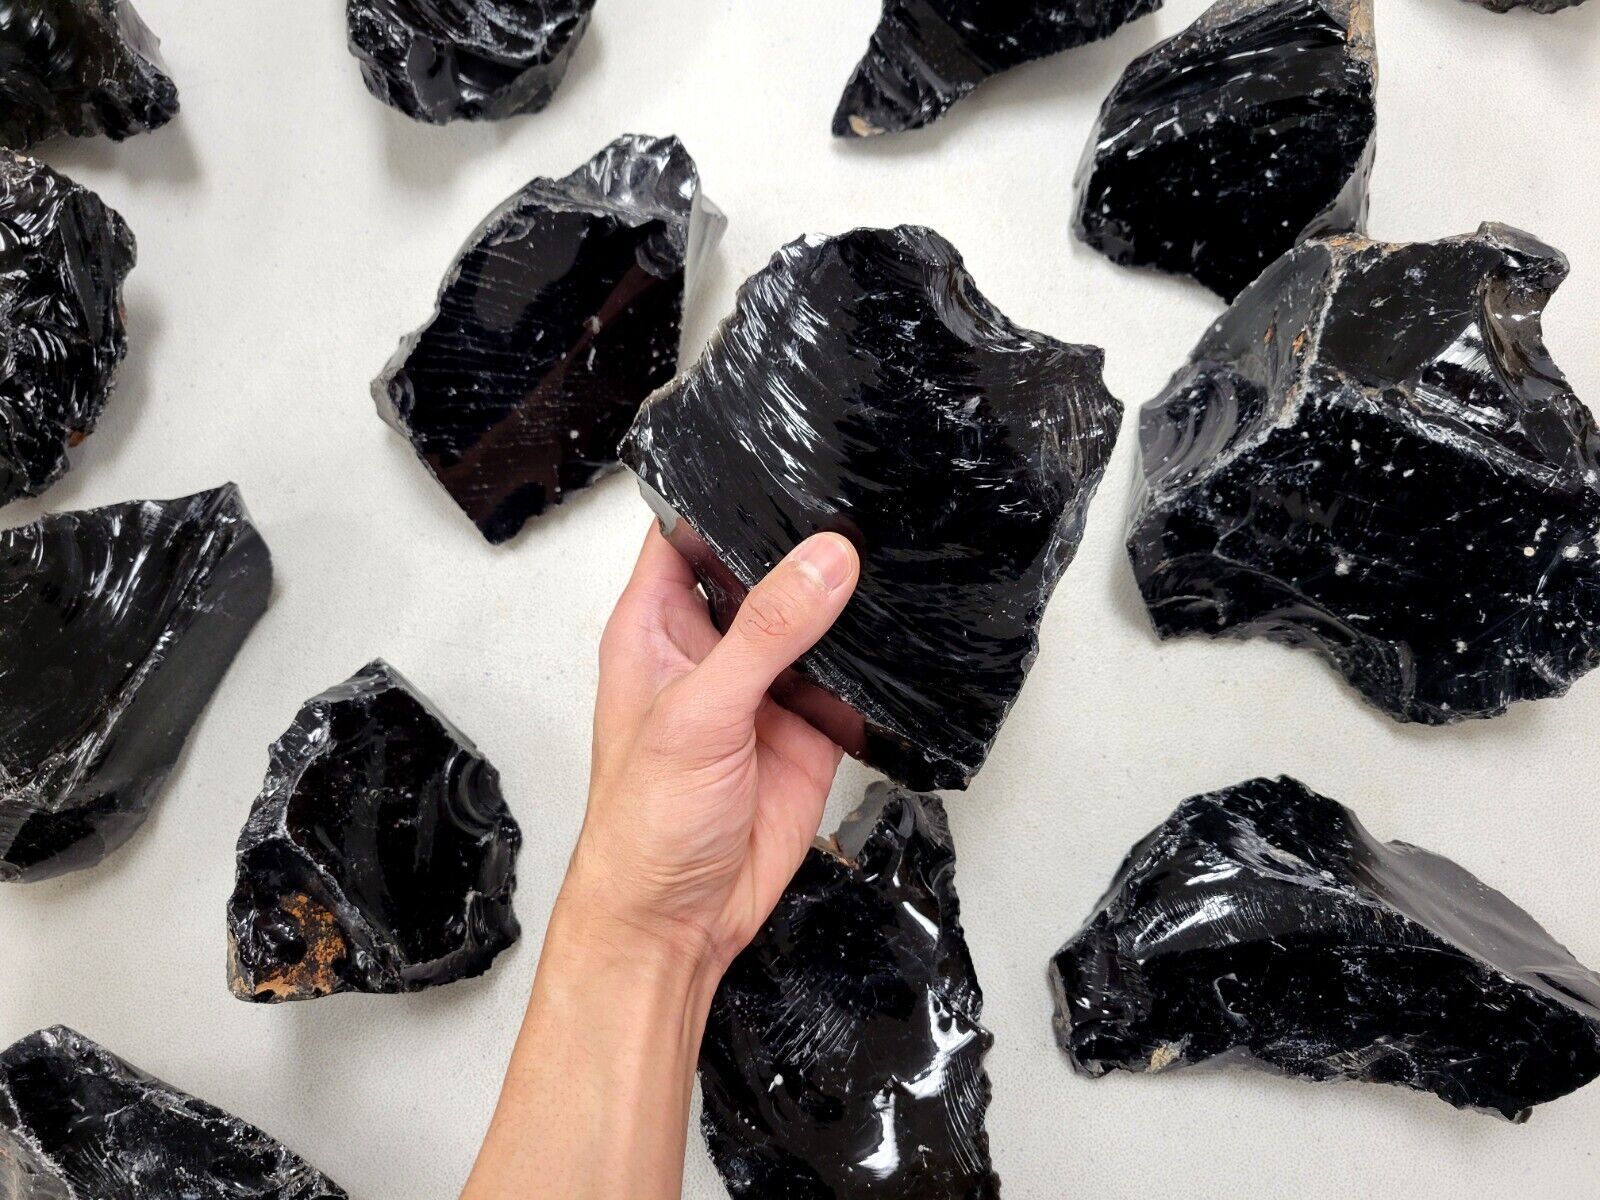 GIANT Black Obsidian Stones Large Raw Healing Crystals Natural Lapidary Rocks